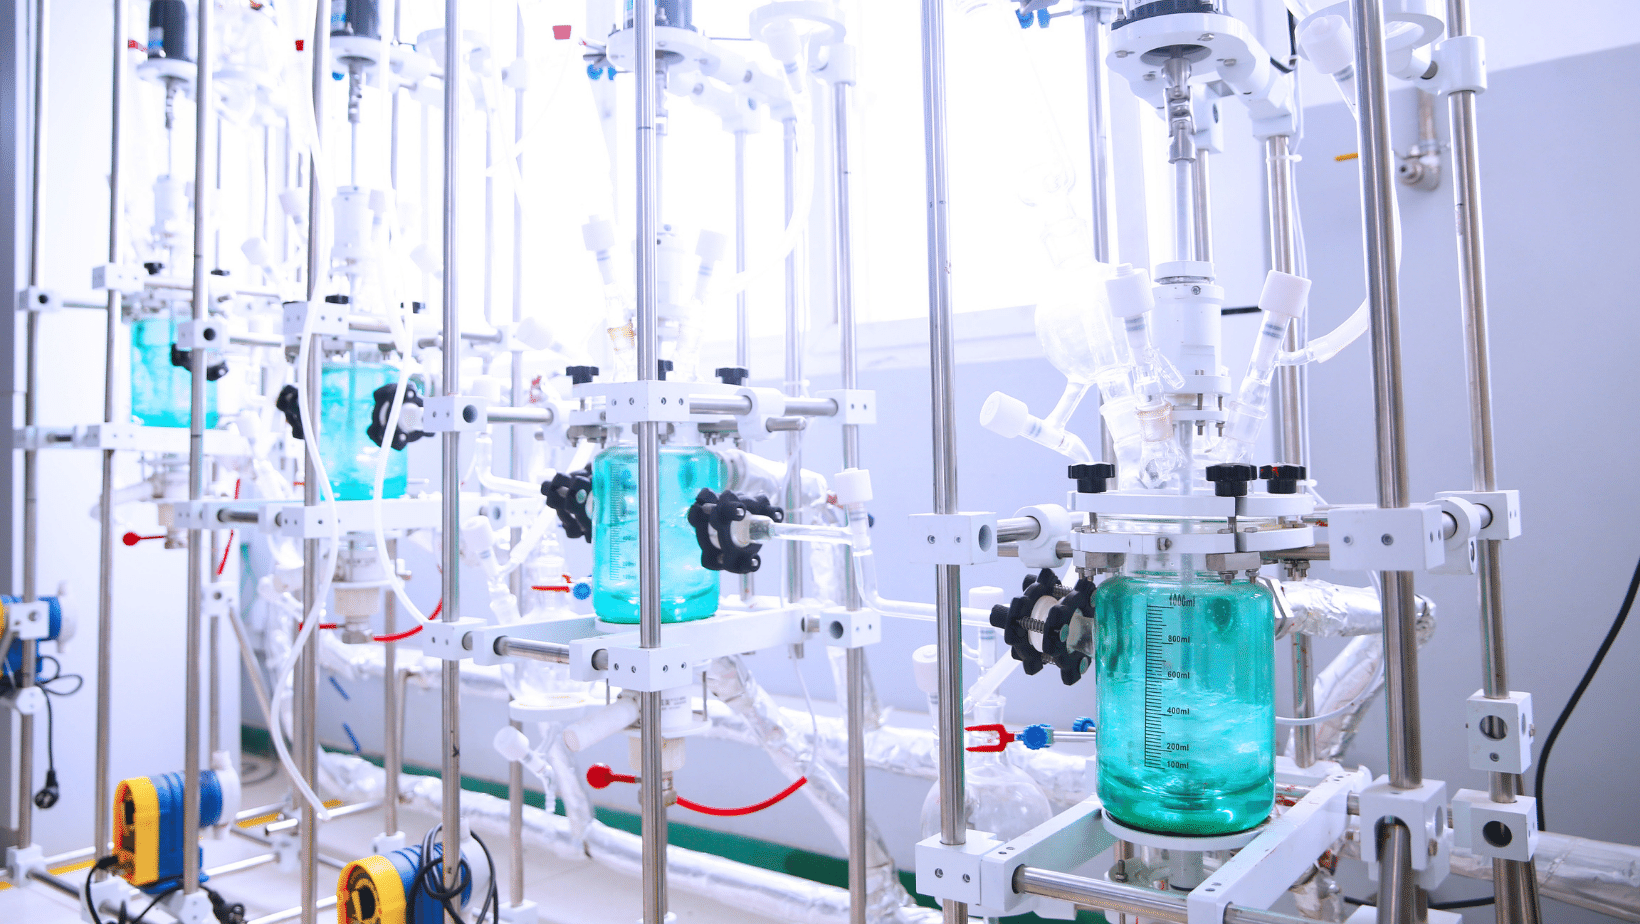 Flow chemistry R&D reactors at Apeloa CDMO providing feasibility testing, process development & optimization (PD&O), scale-up, commercial equipment screening and sample preparation. Apeloa CDMO covers the full development and manufacturing lifecycle of APIs.